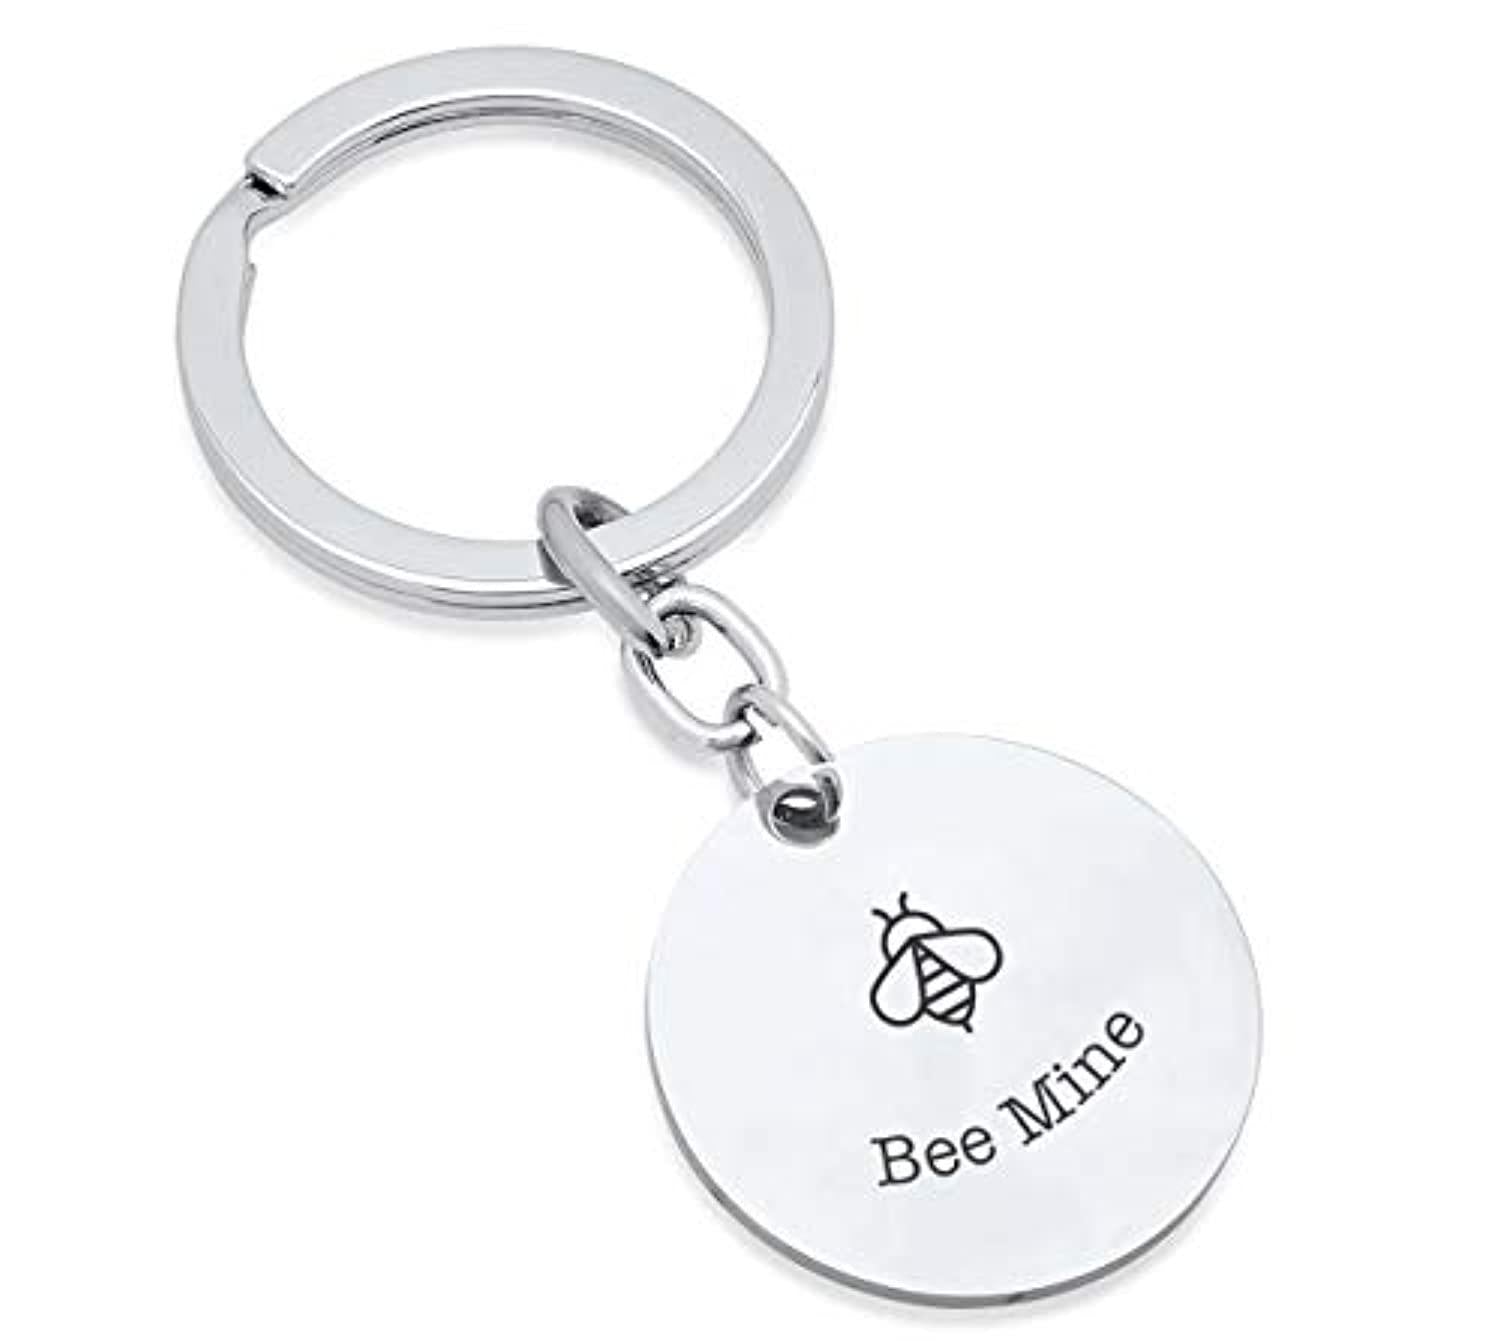 There's always time for another beer - engraved stainless steel bottle –  Beach Cove Jewelry